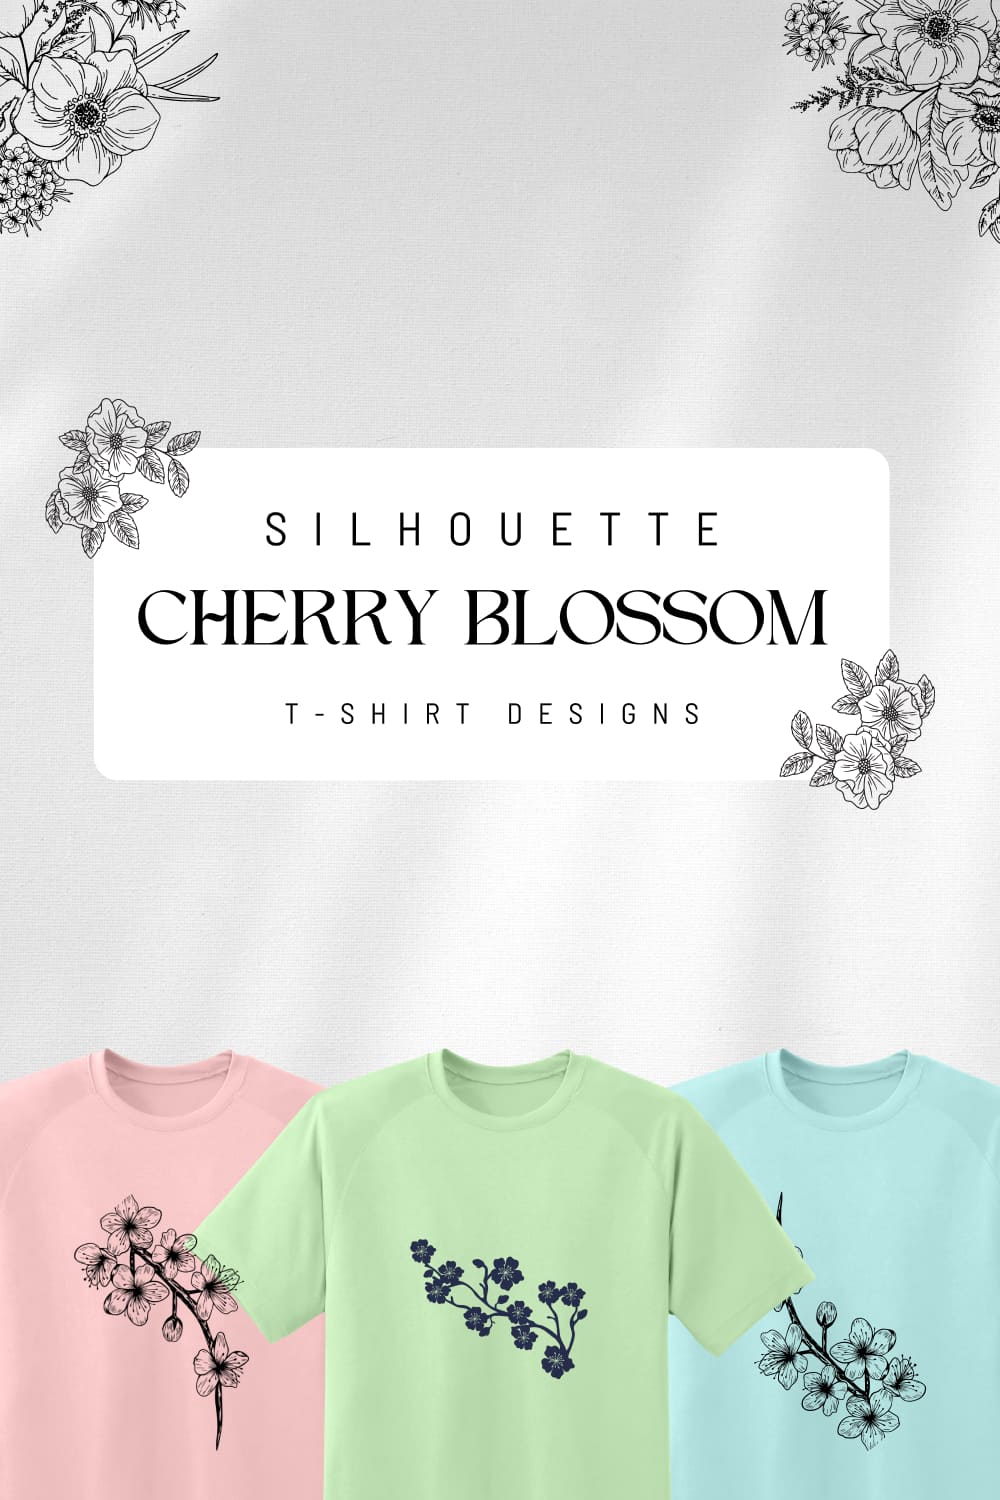 Silhouette cherry blossom t shirt designs images of pinterest.